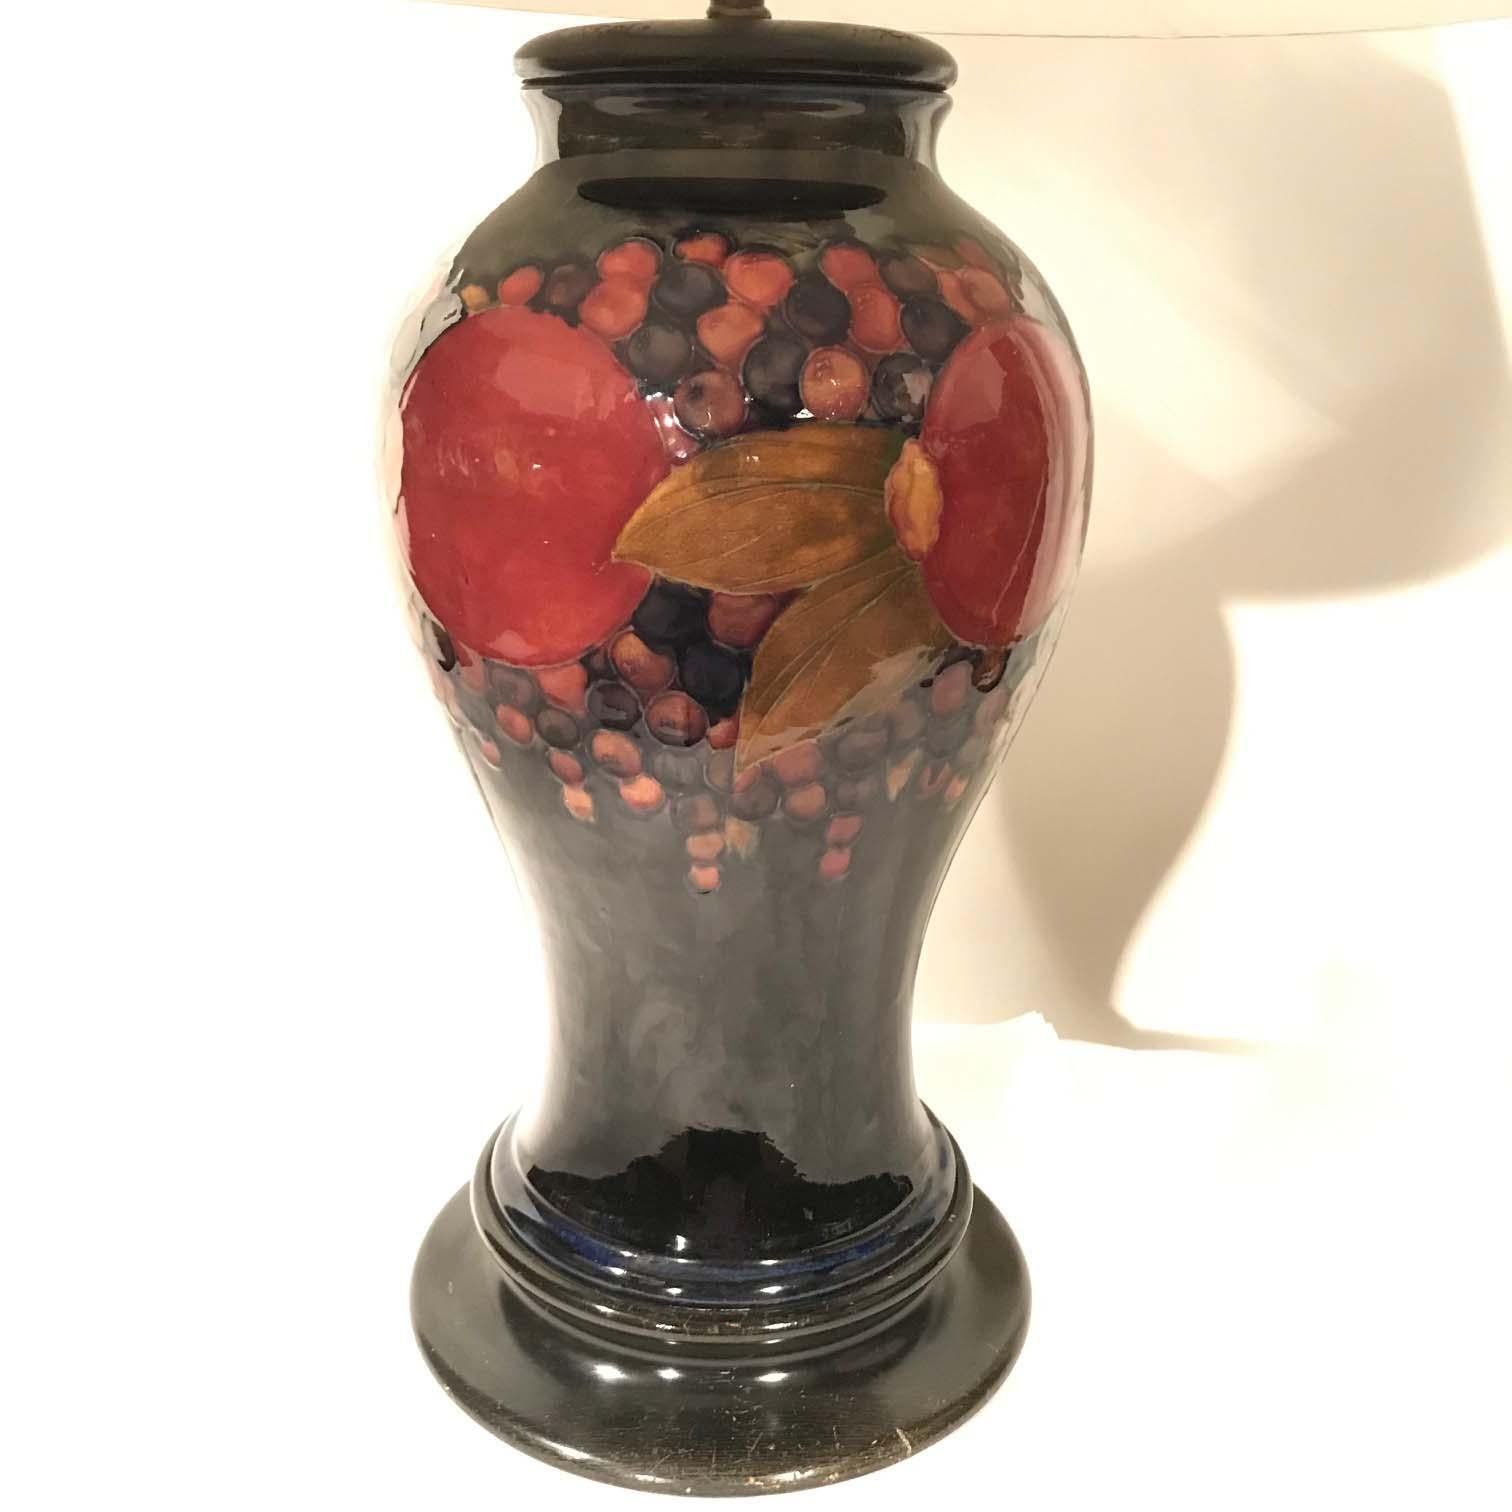 A stunning large William Moorcroft Pottery pomegranate baluster vase mounted as a table lamp, circa 1925.
Decorated in a classic Moorcroft pattern, featuring five pomegranate fruits one which is open, along with clusters of berries and leaves all on